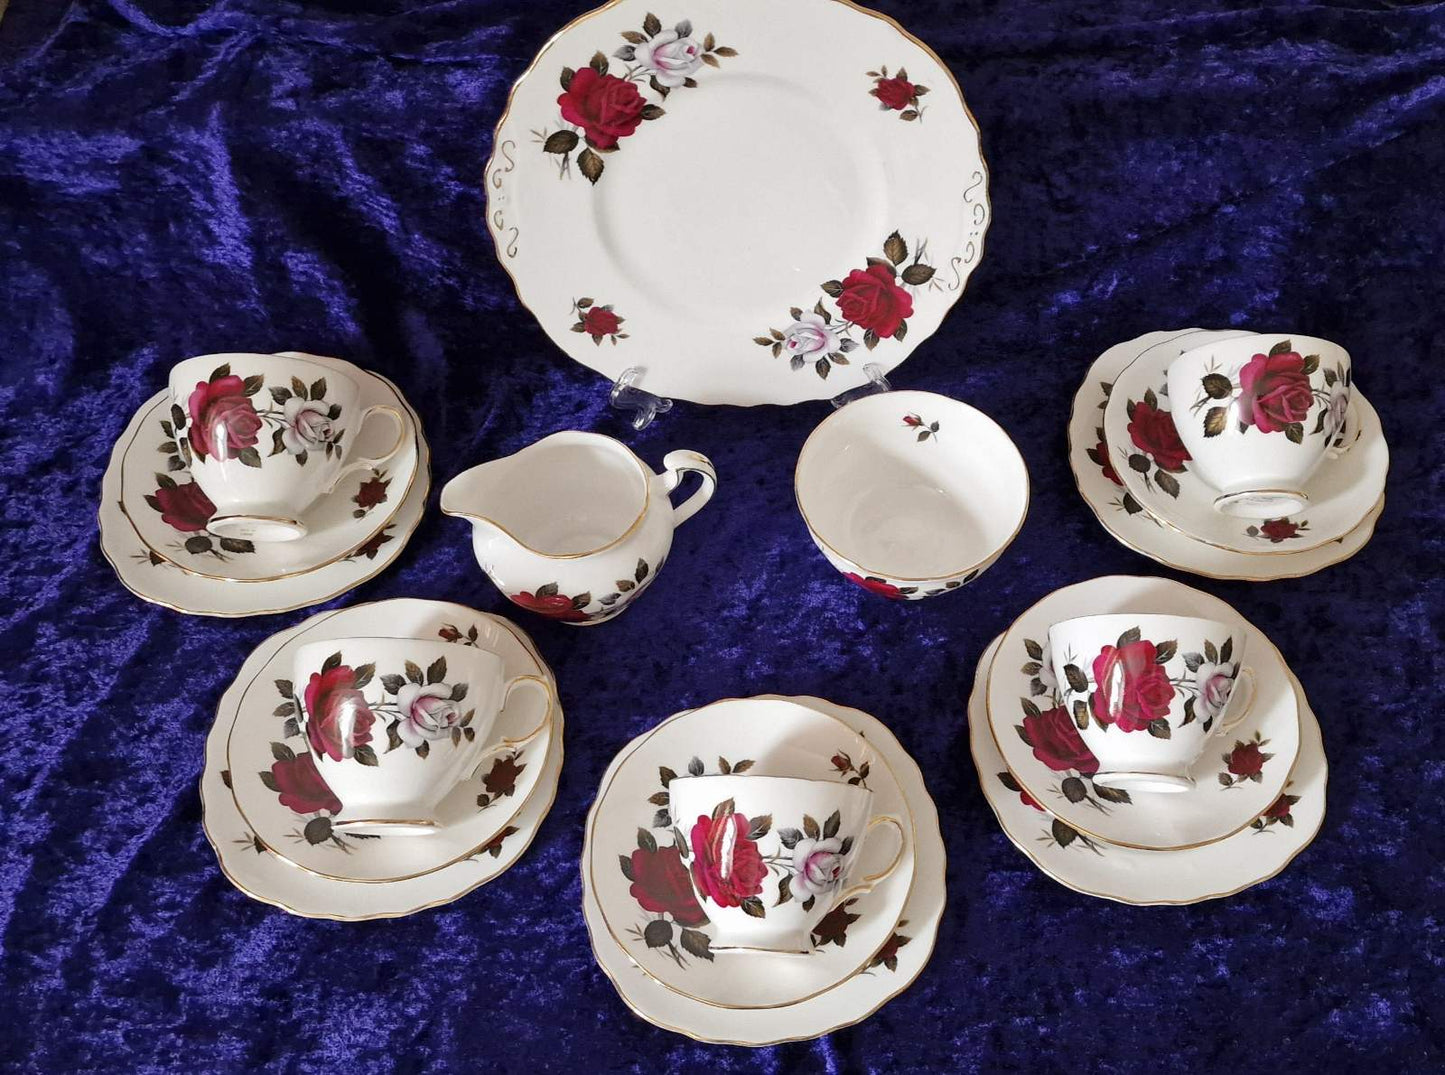 Colclough "Amoretta Rose" tea set featuring 5 cups and saucers adorned with roses.